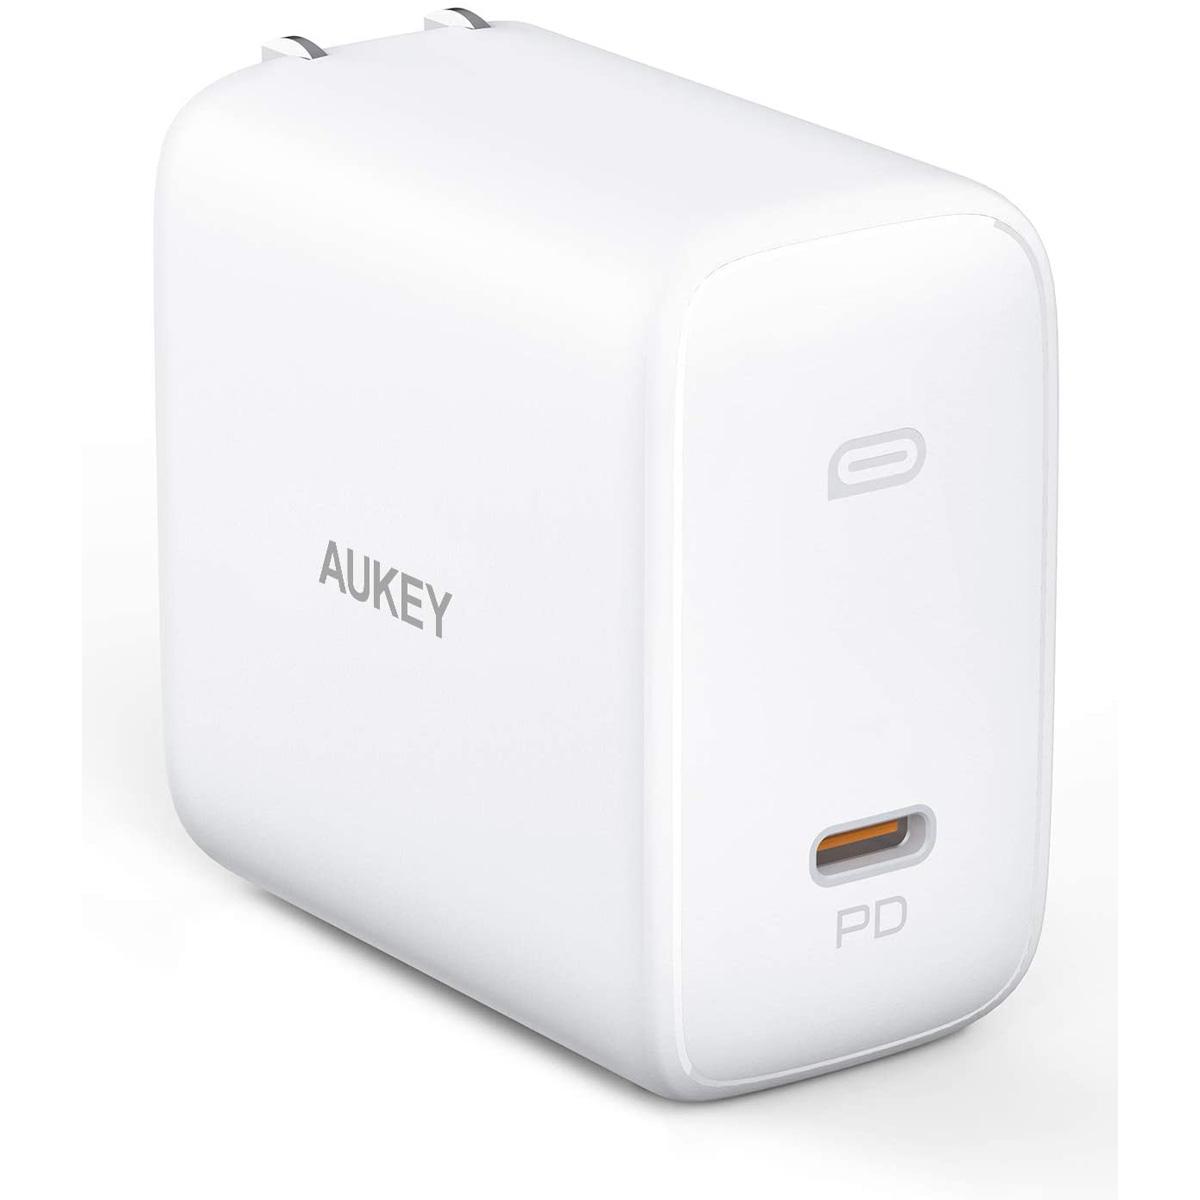 Aukey 100W GaNFast Omnia USB-C PD 3.0 Wall Charger for $29.99 Shipped